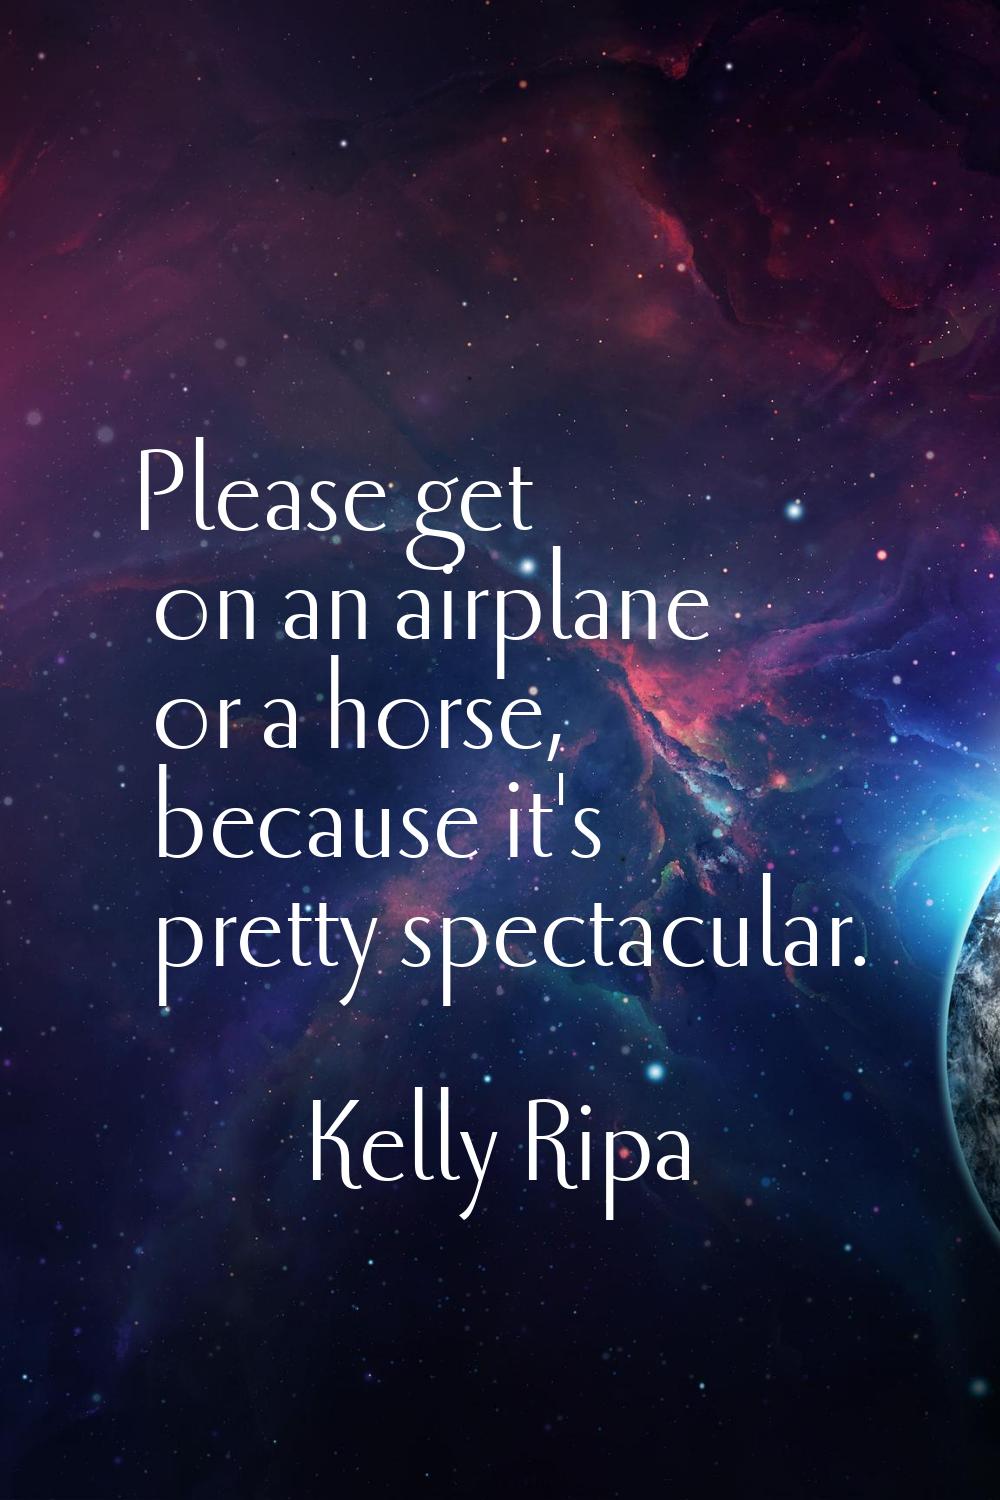 Please get on an airplane or a horse, because it's pretty spectacular.